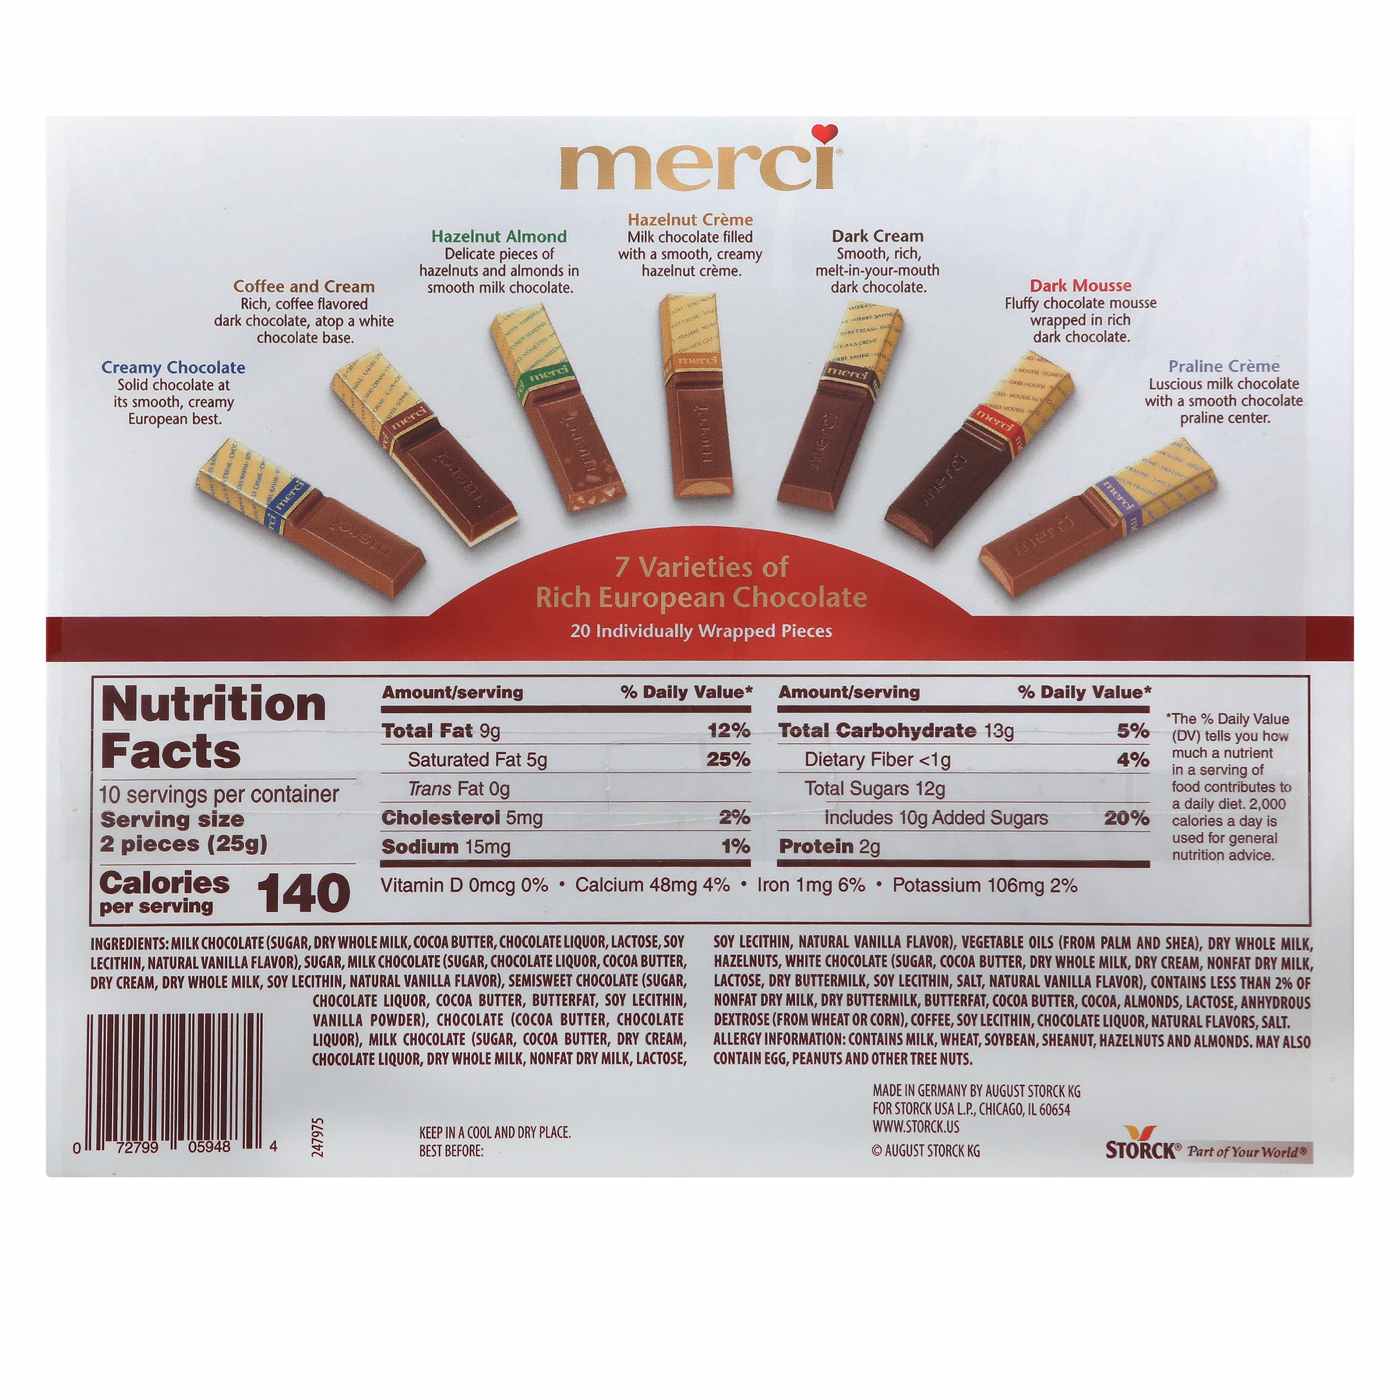 merci Finest Assortment – Information and Nutrition Facts